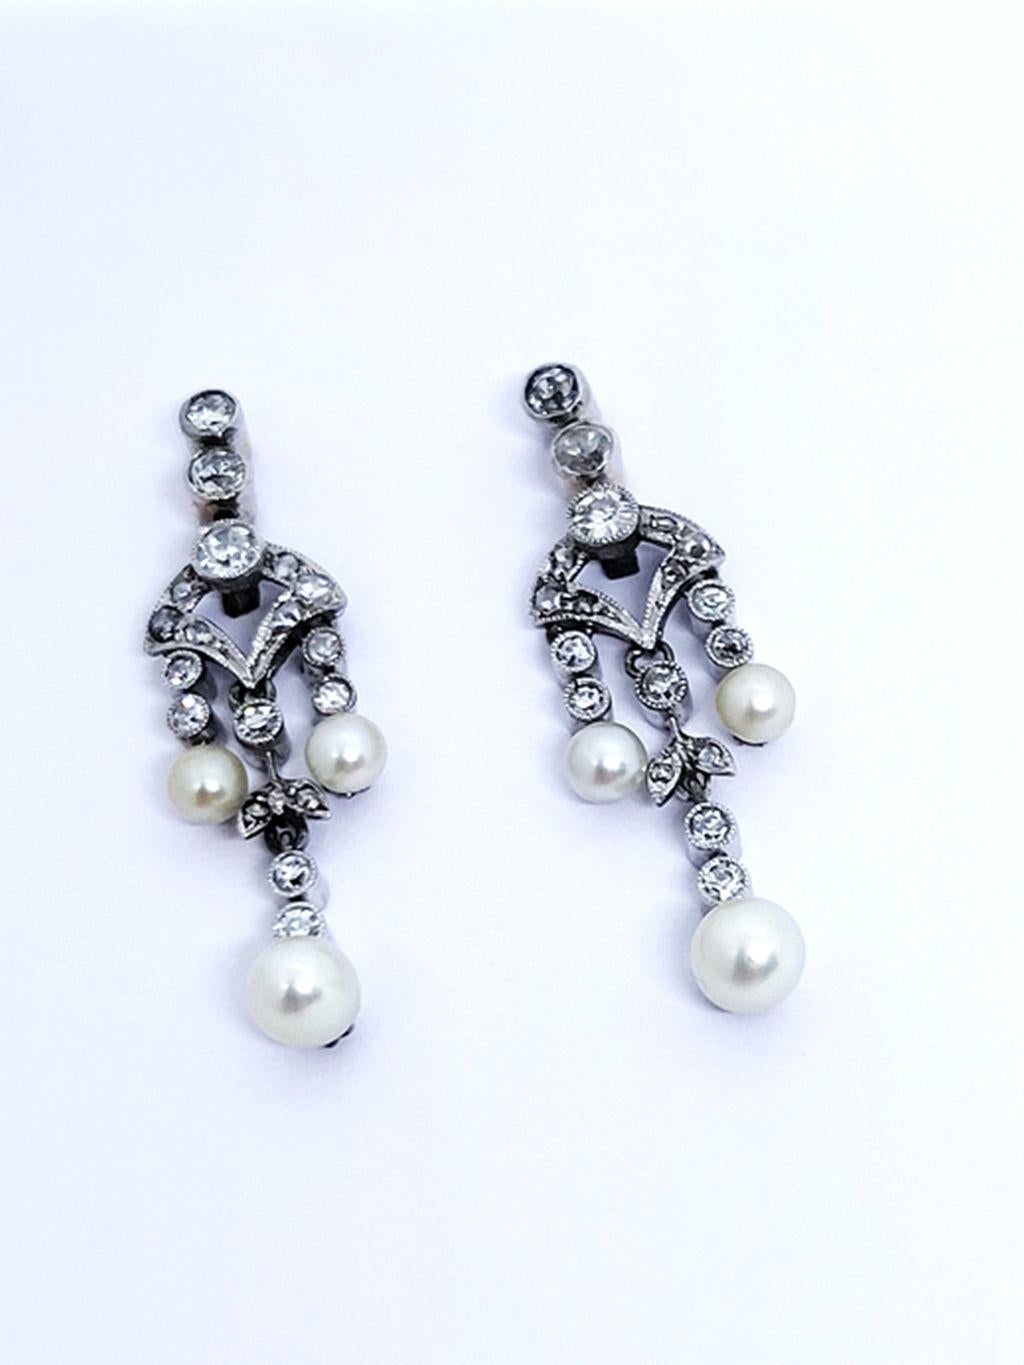 These finely crafted delicate Edwardian earrings from ca. 1910 are perfect for a sophisticated lady. Sparkling rose cut diamonds, set in white gold complement lustrous seed pearls in a beautiful garland style combination.
With these unique and